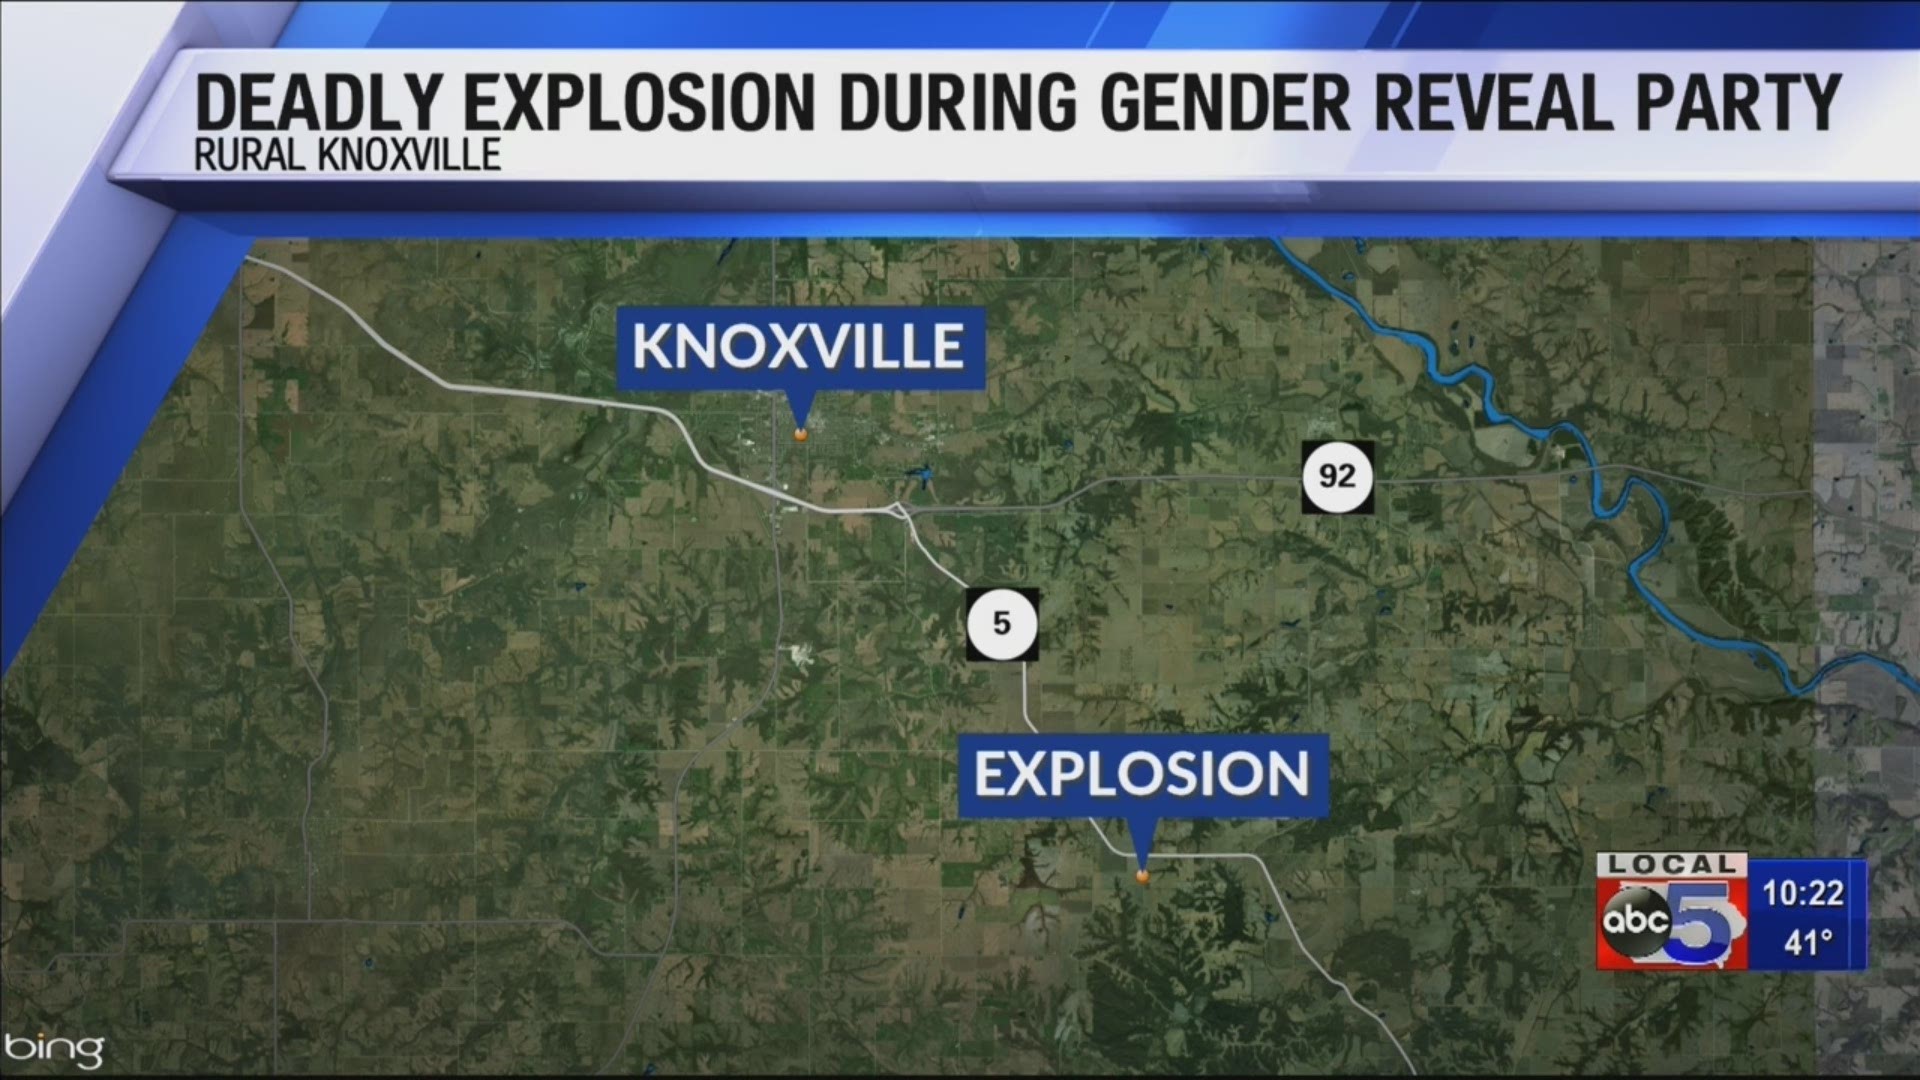 Deputies called to a home say a gender reveal announcement resulted in the explosion, which caused a flying piece of debris to strike the 56-year-old woman.